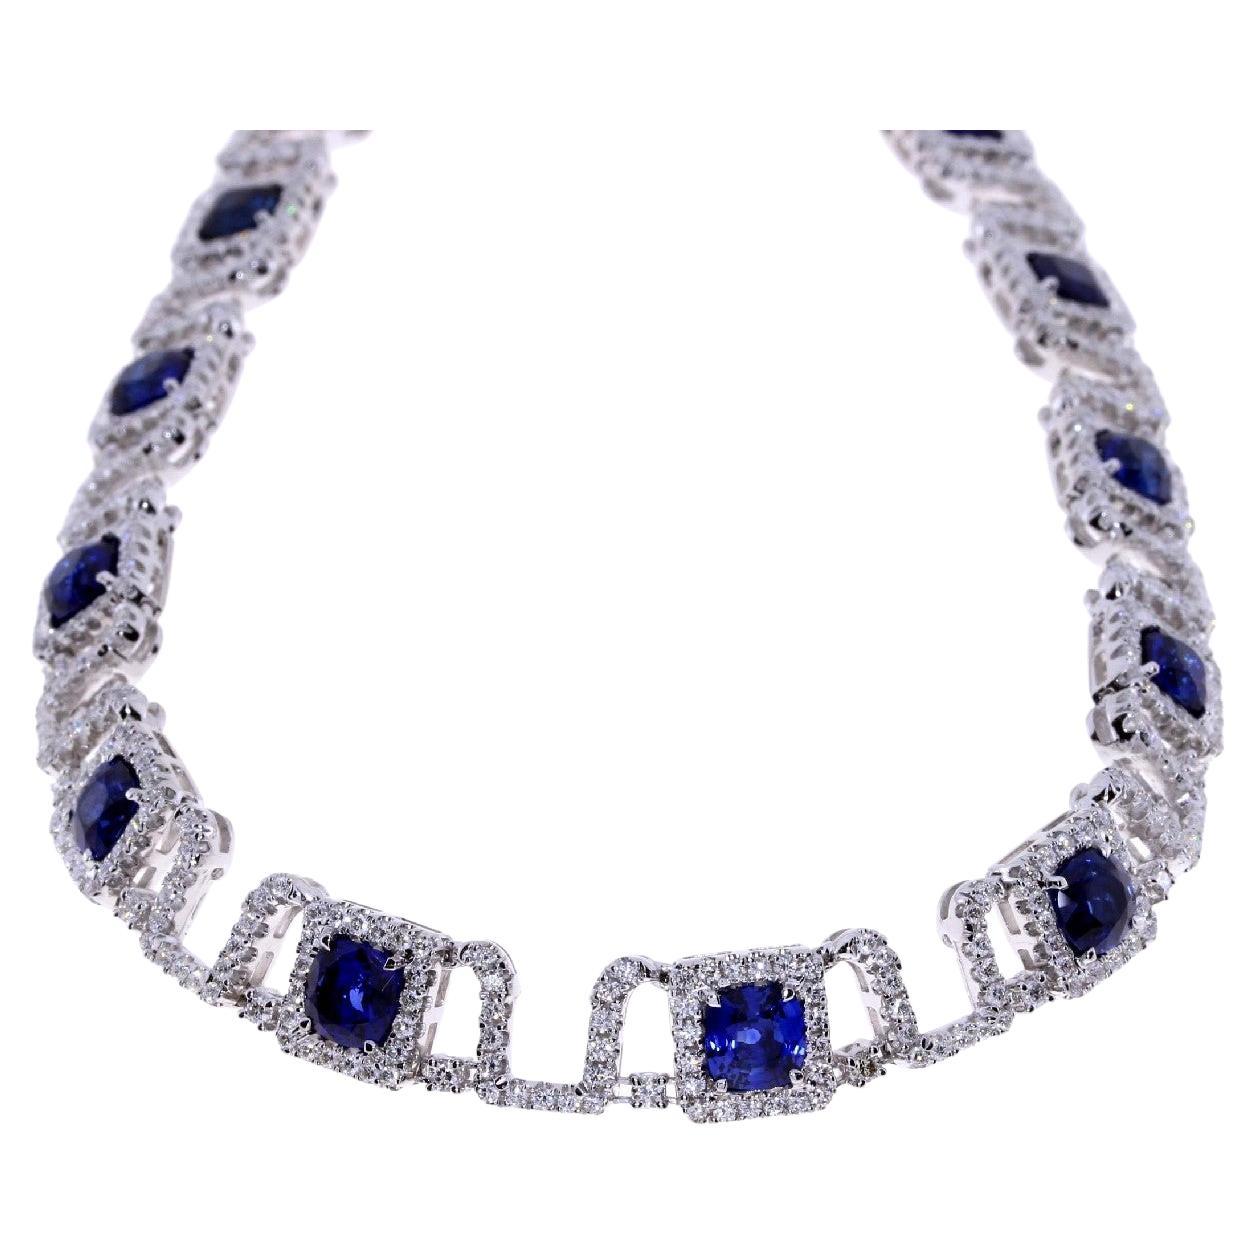 19.67ct Cushion Cut Blue Sapphire and Diamond Necklace For Sale